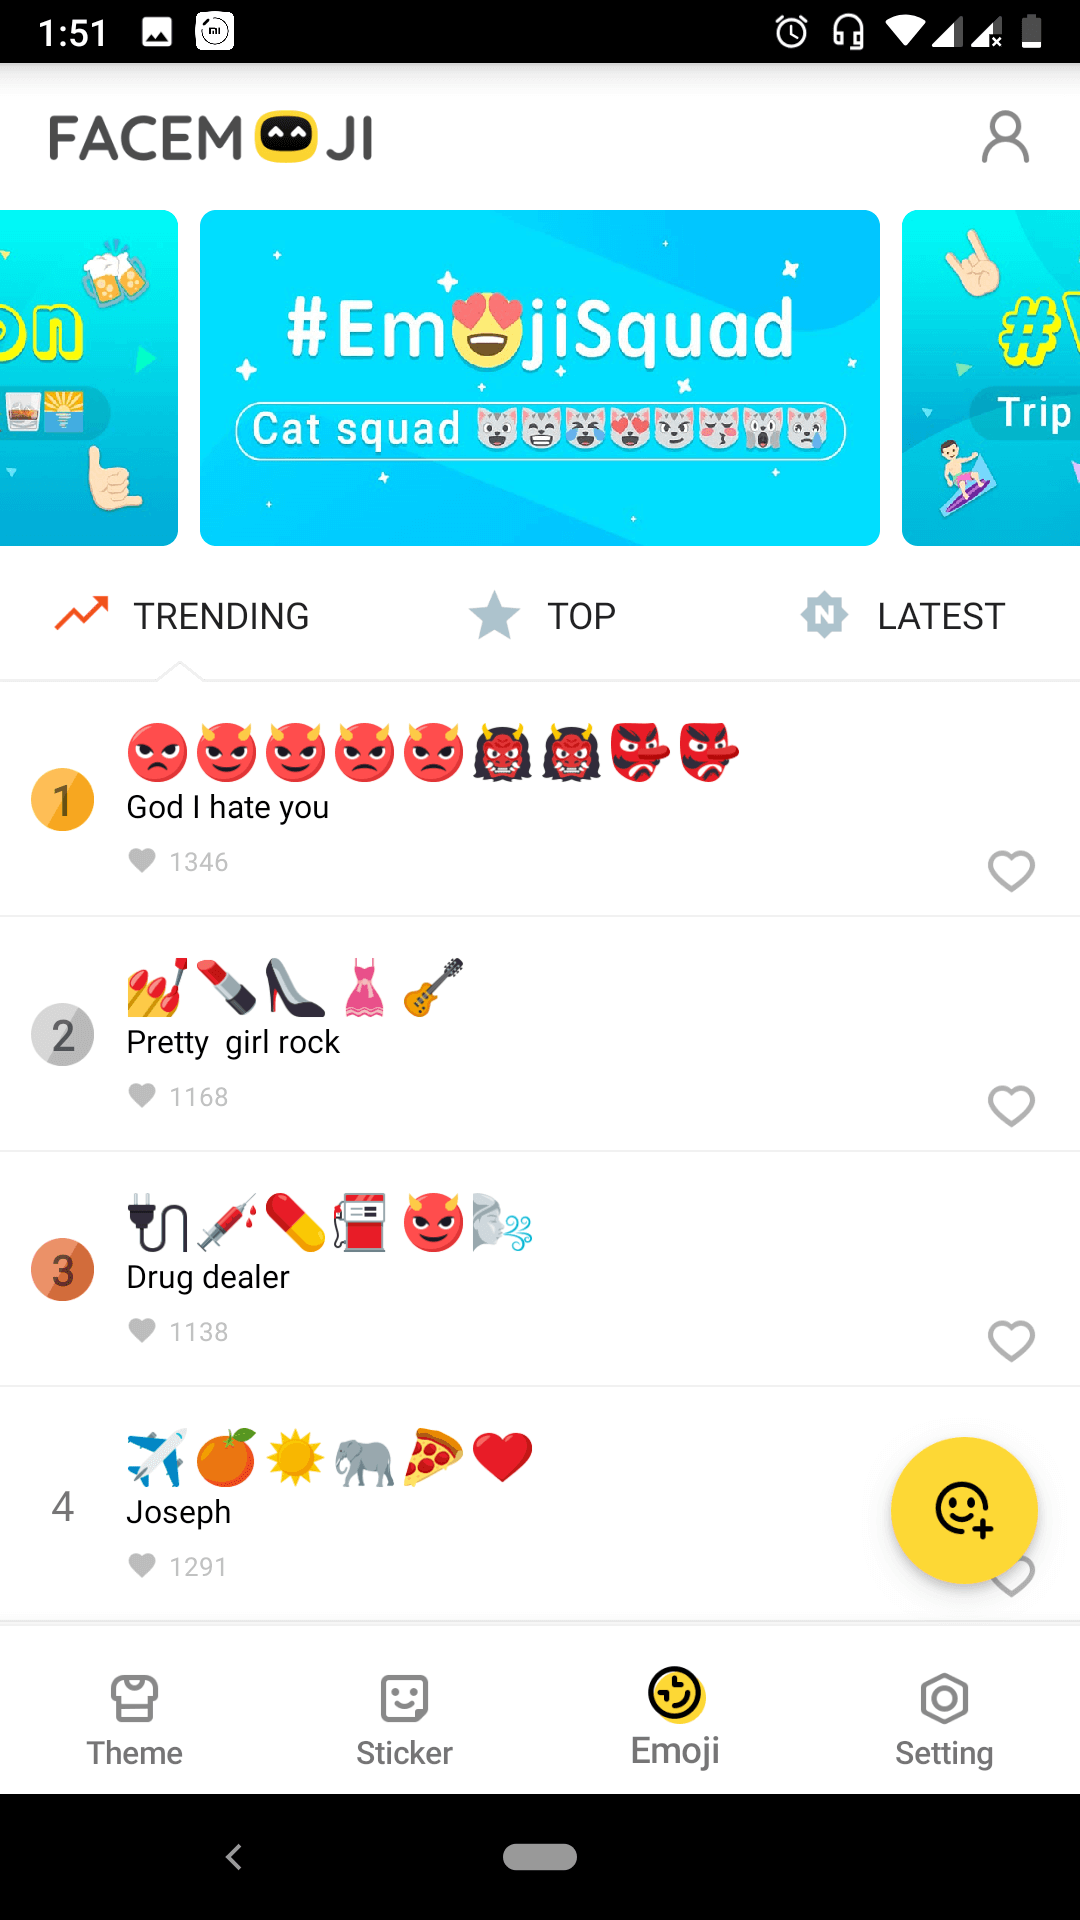 best emoji apps for Android